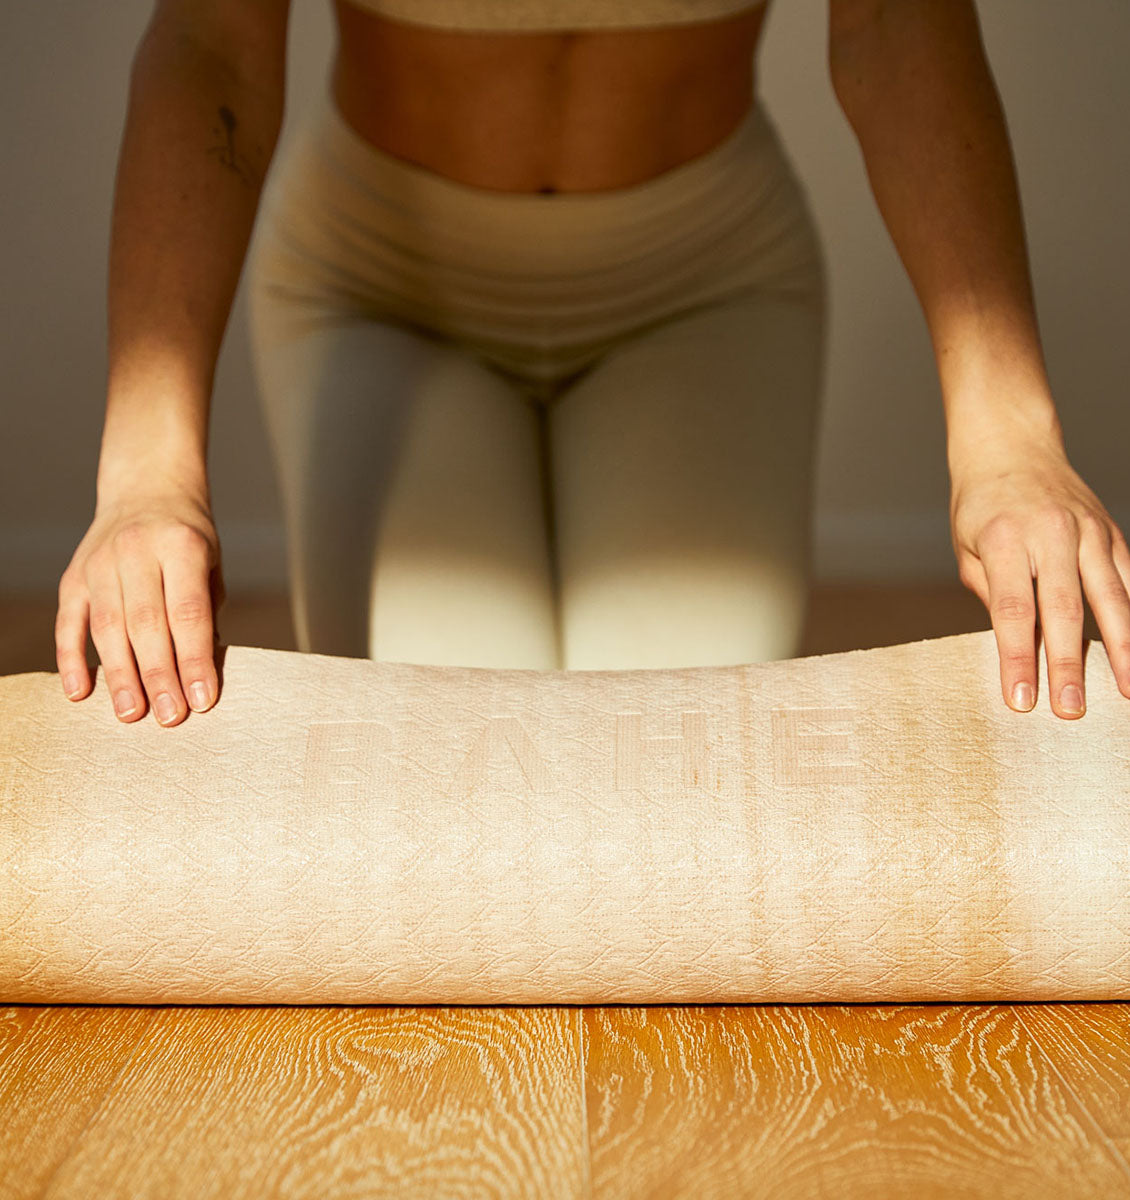 BAHE Prime Support Marble Yoga Mat - 6mm - Dusty Beige Marble